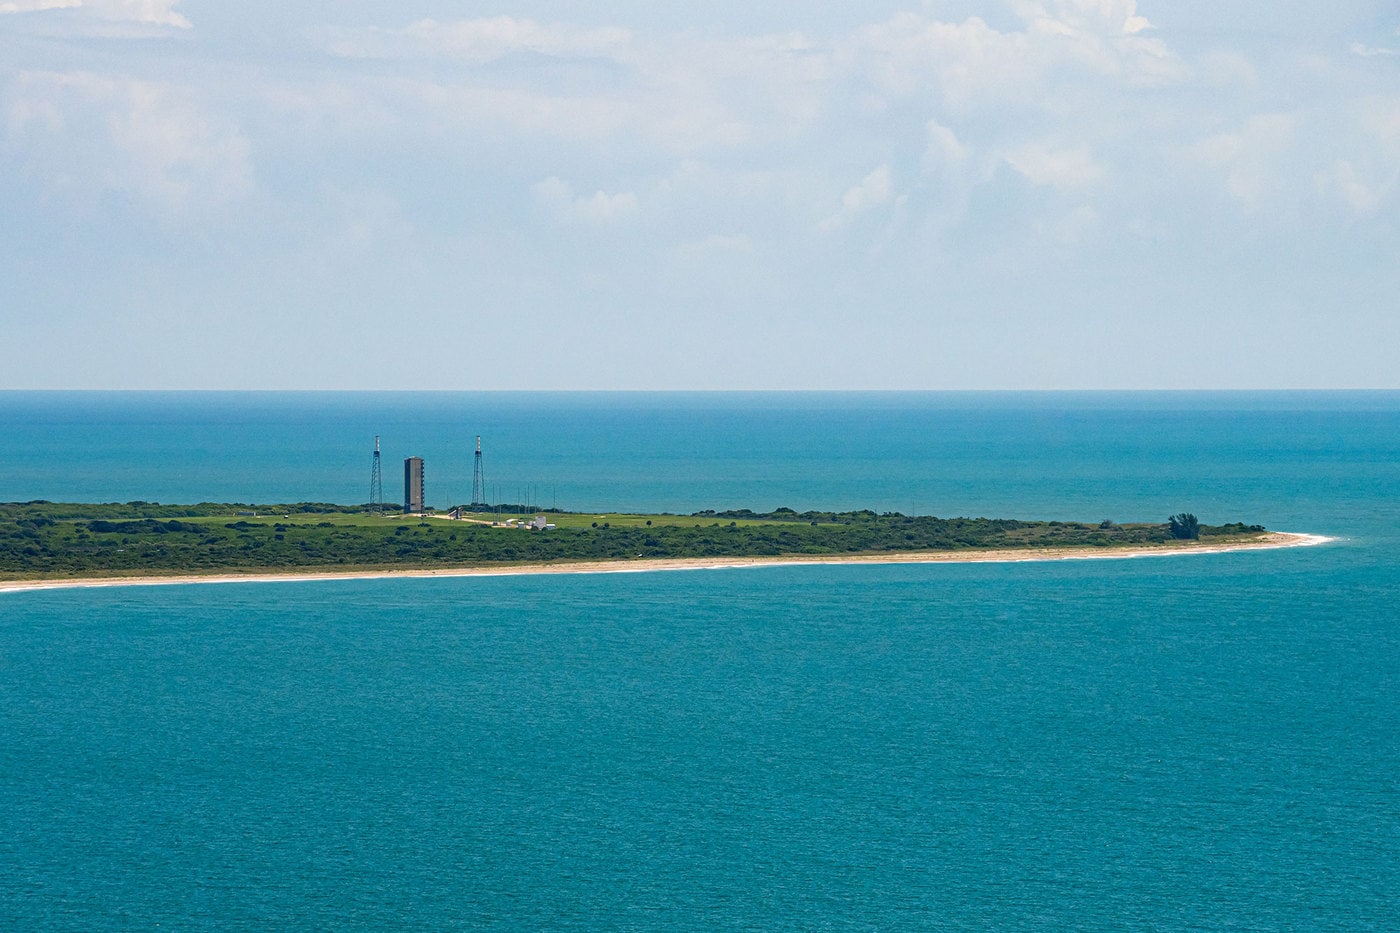 Photo Of Space Launch Complex 46 In Cape Canaveral, Florida